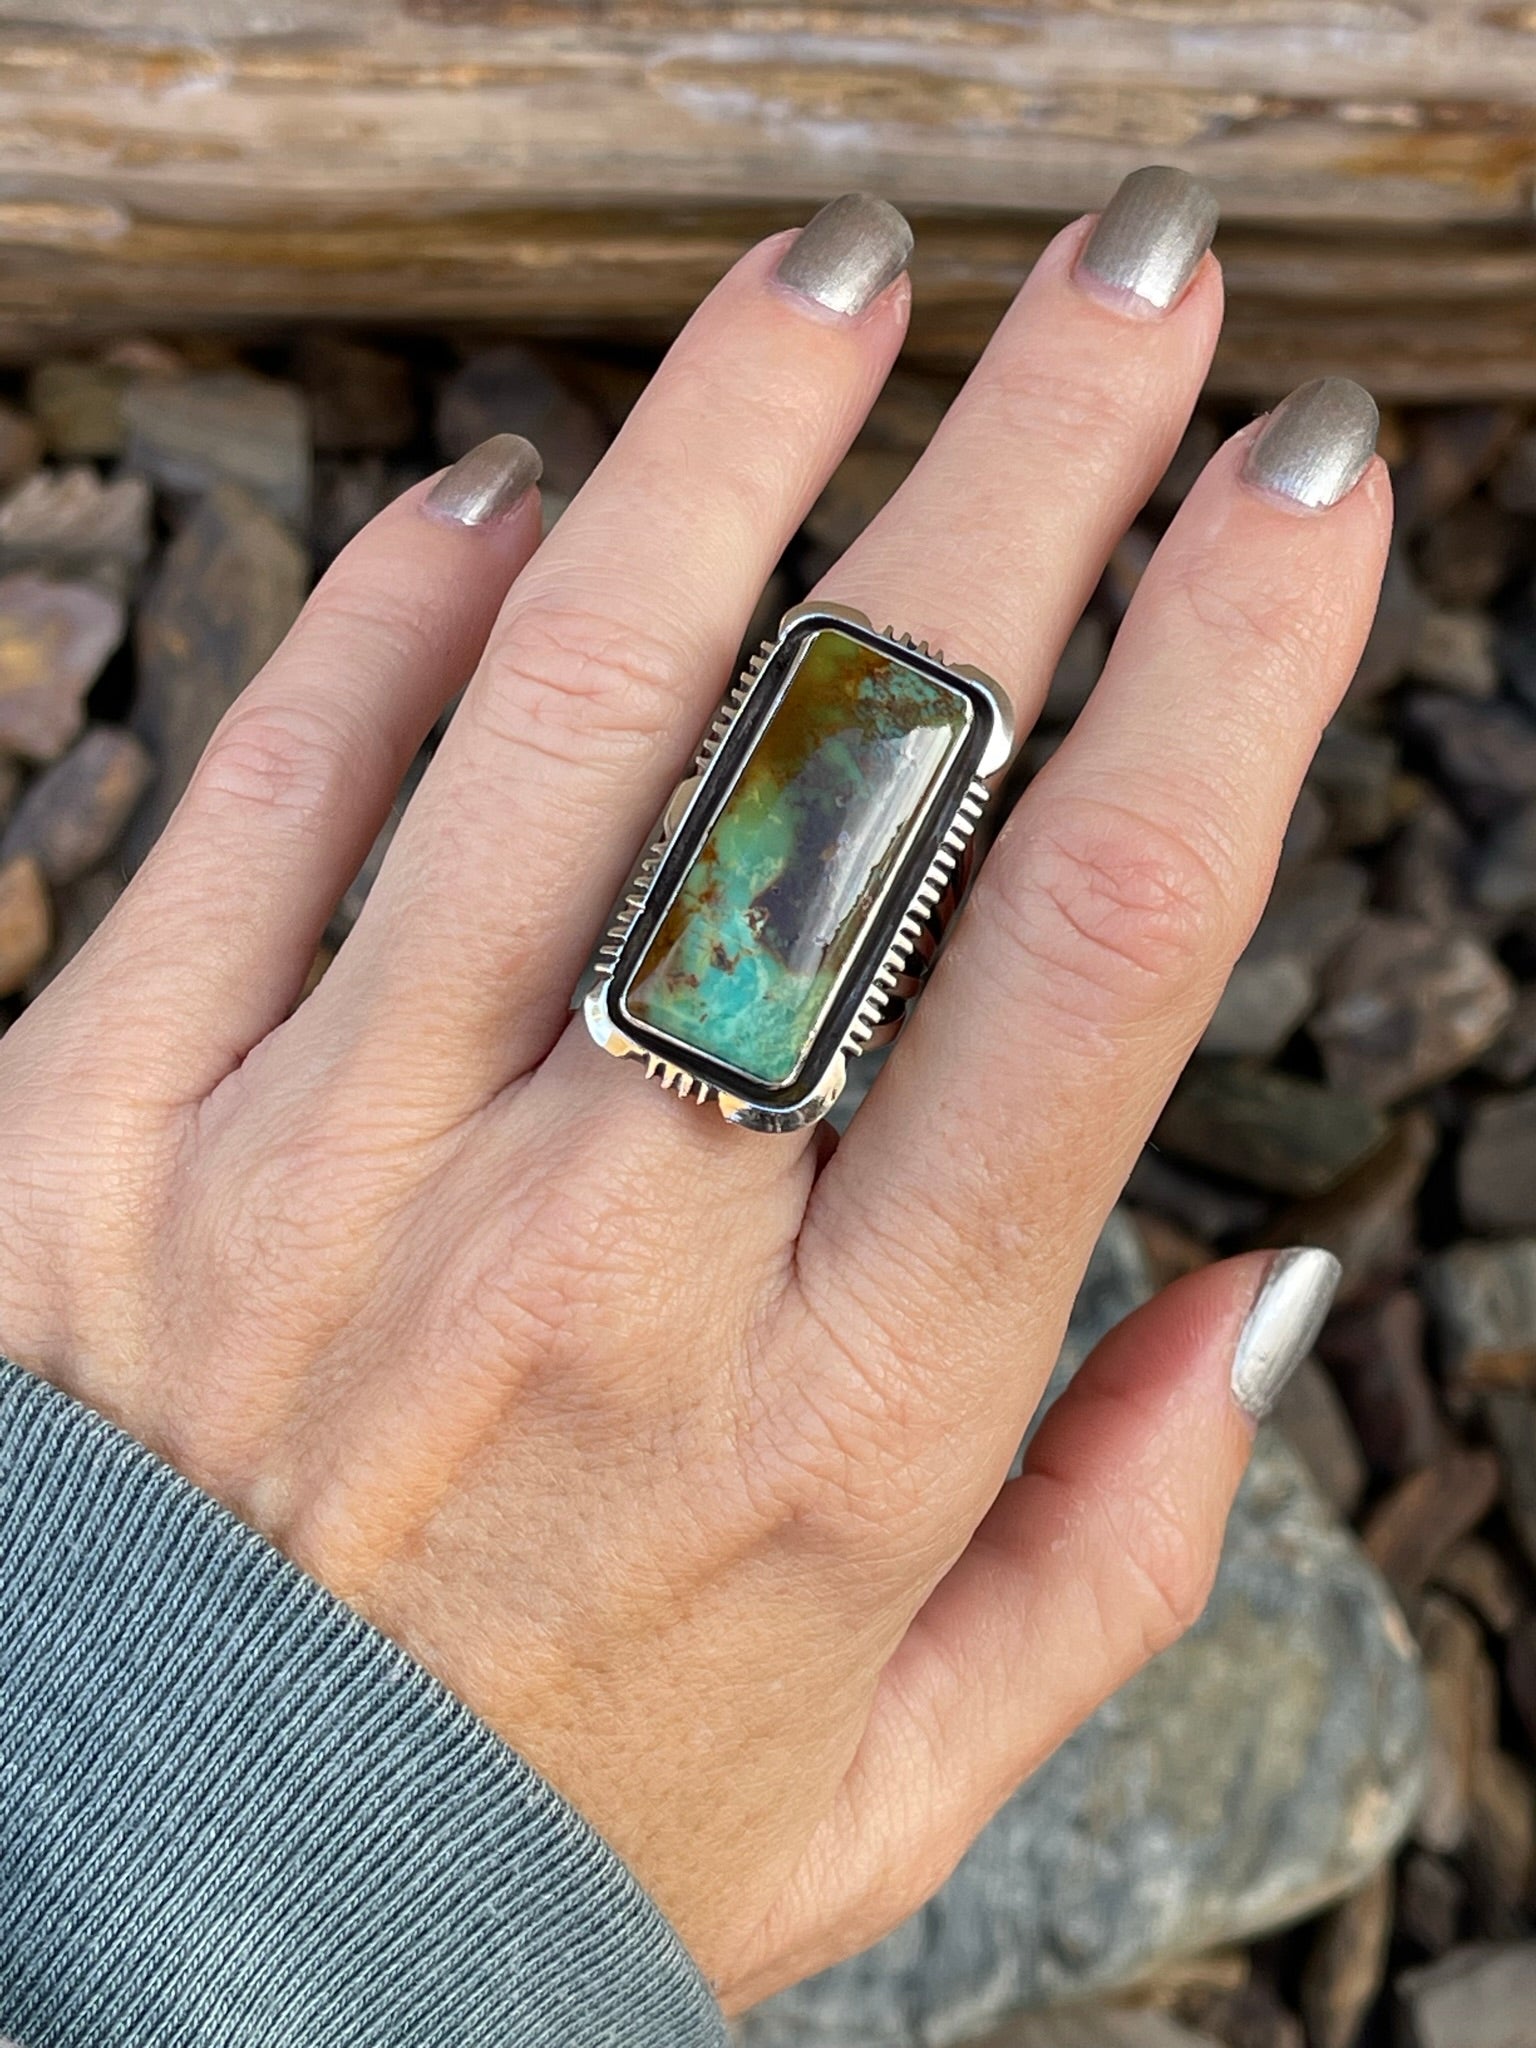 Hand Crafted Sterling Silver Rectangle Cut Kingman Turquoise Ring with Shadow Box Trim - Size 7 1/2